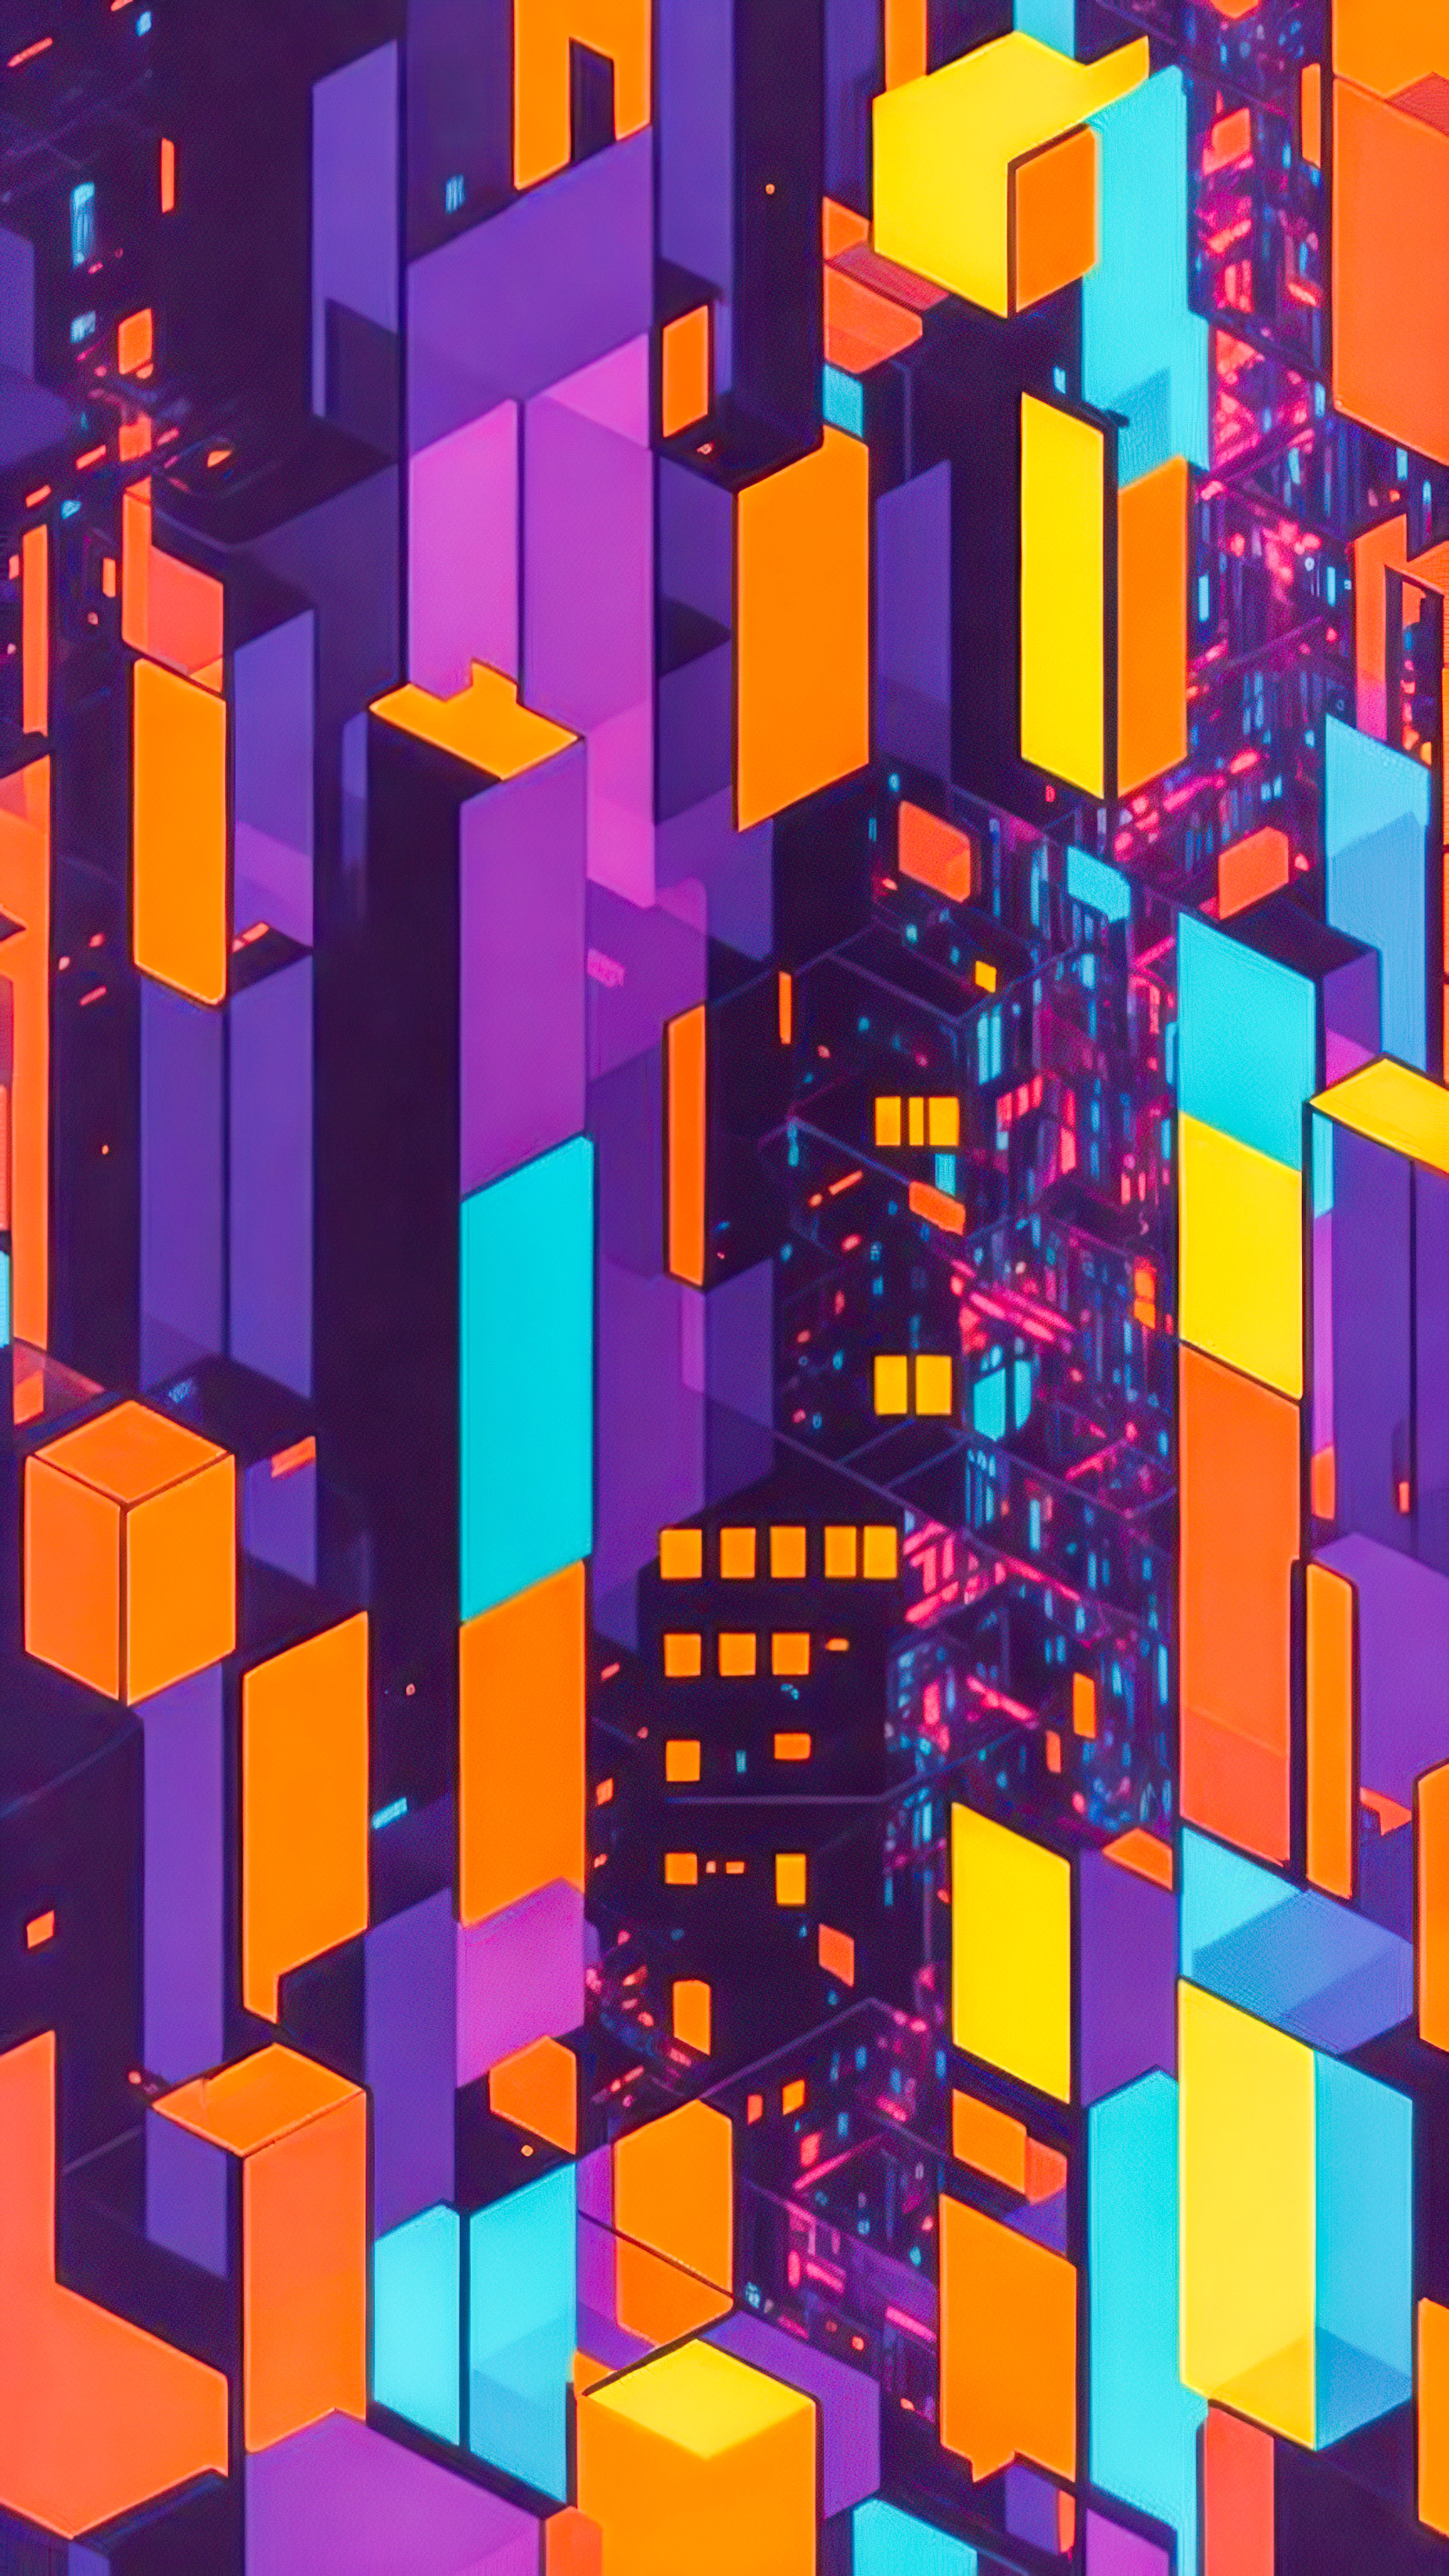 Feel the rhythm and energy of New York with our city abstract iPhone wallpaper.